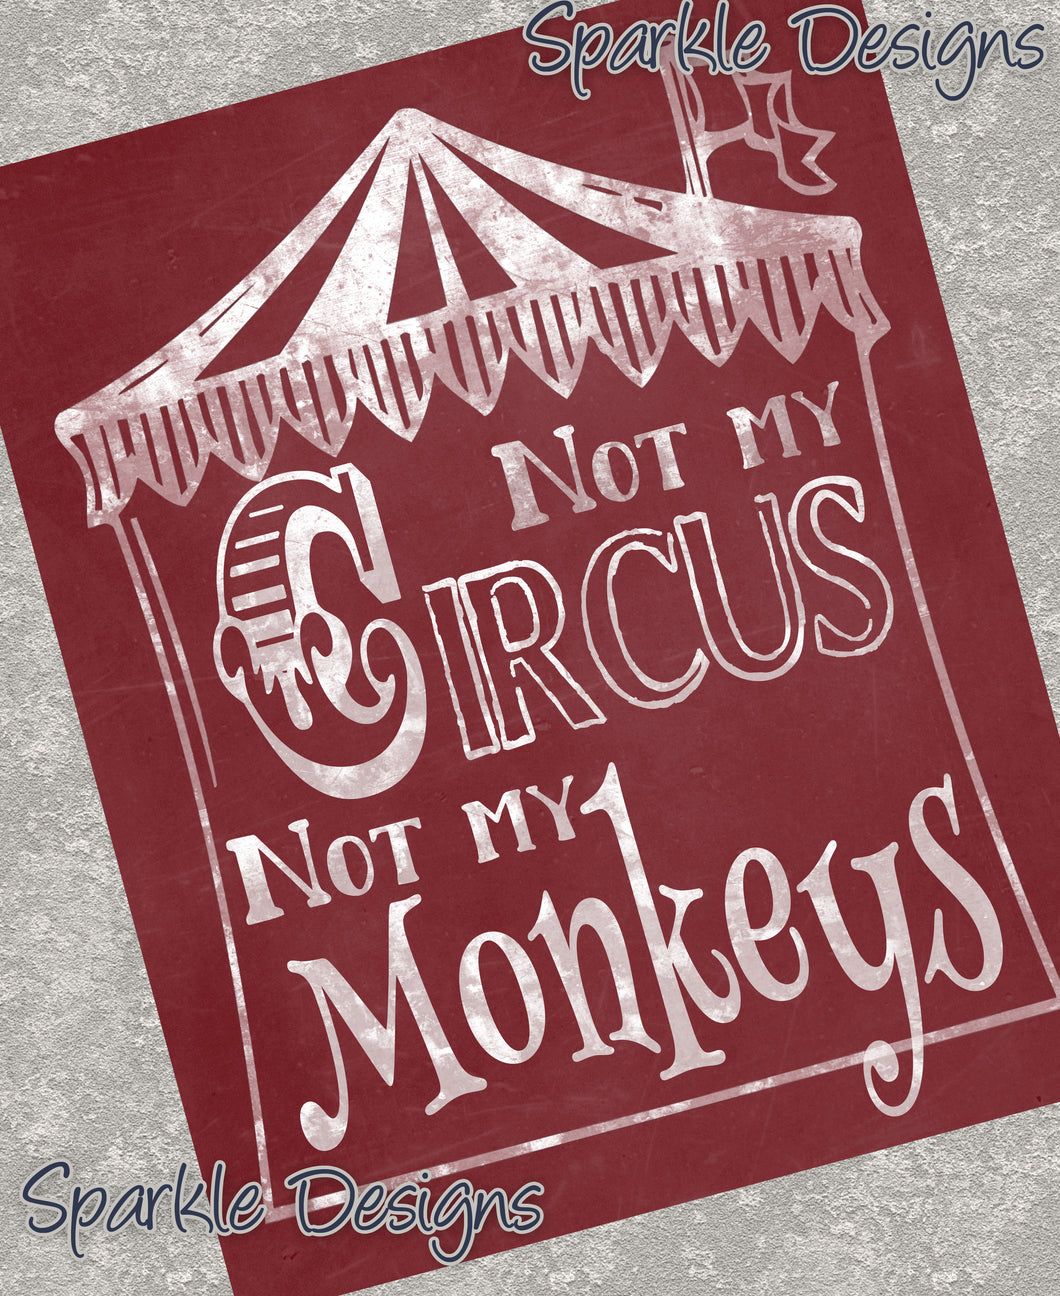 Not my circus, not my monkeys - Tent version 93 Magnet